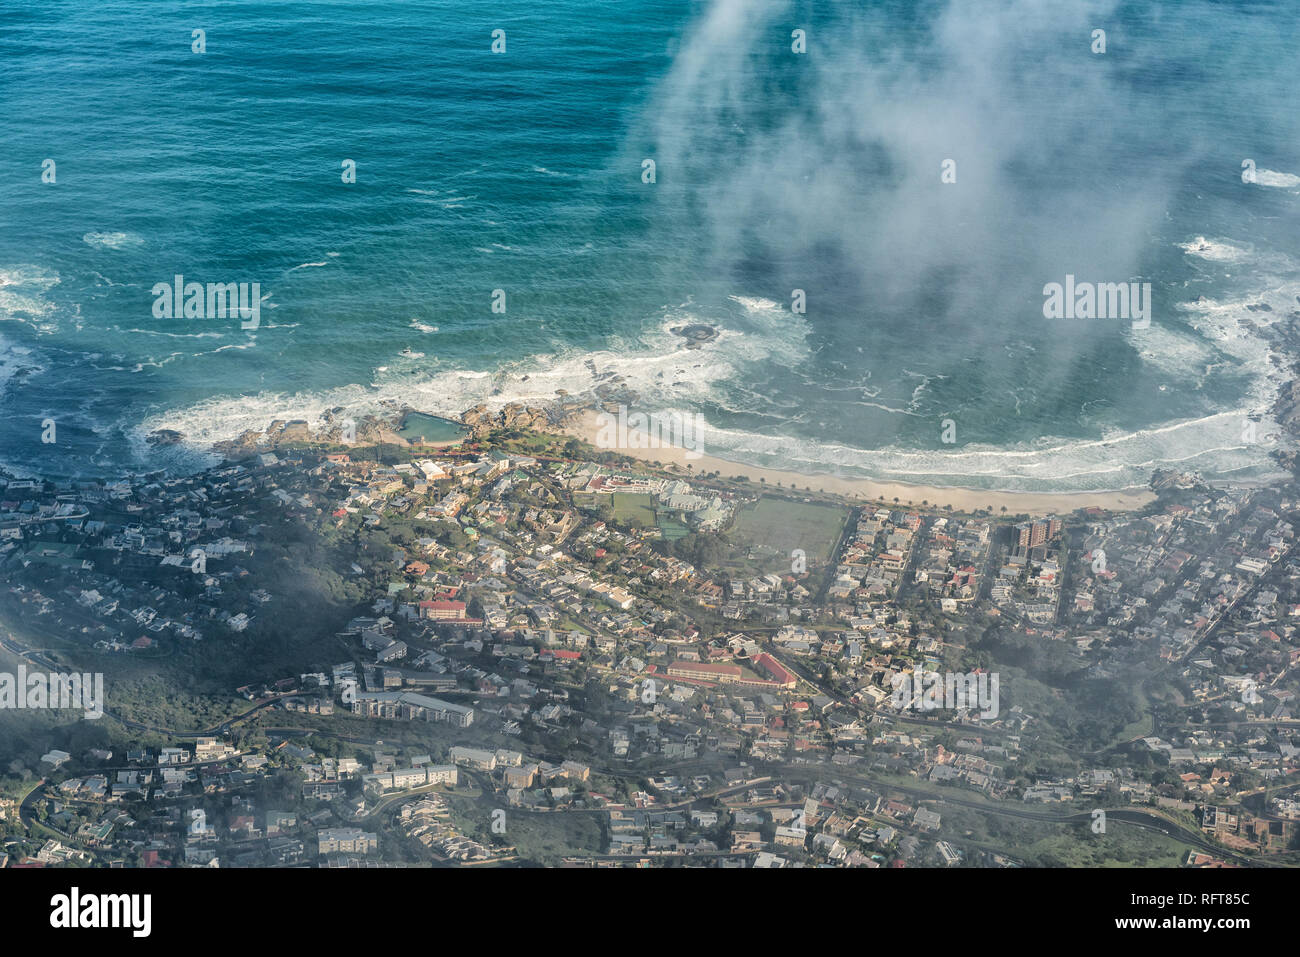 CAPE TOWN, SOUTH AFRICA, AUGUST 17, 2018: Camps Bay in Cape Town as seen through the clouds from the upper cable station on Table Mountain Stock Photo